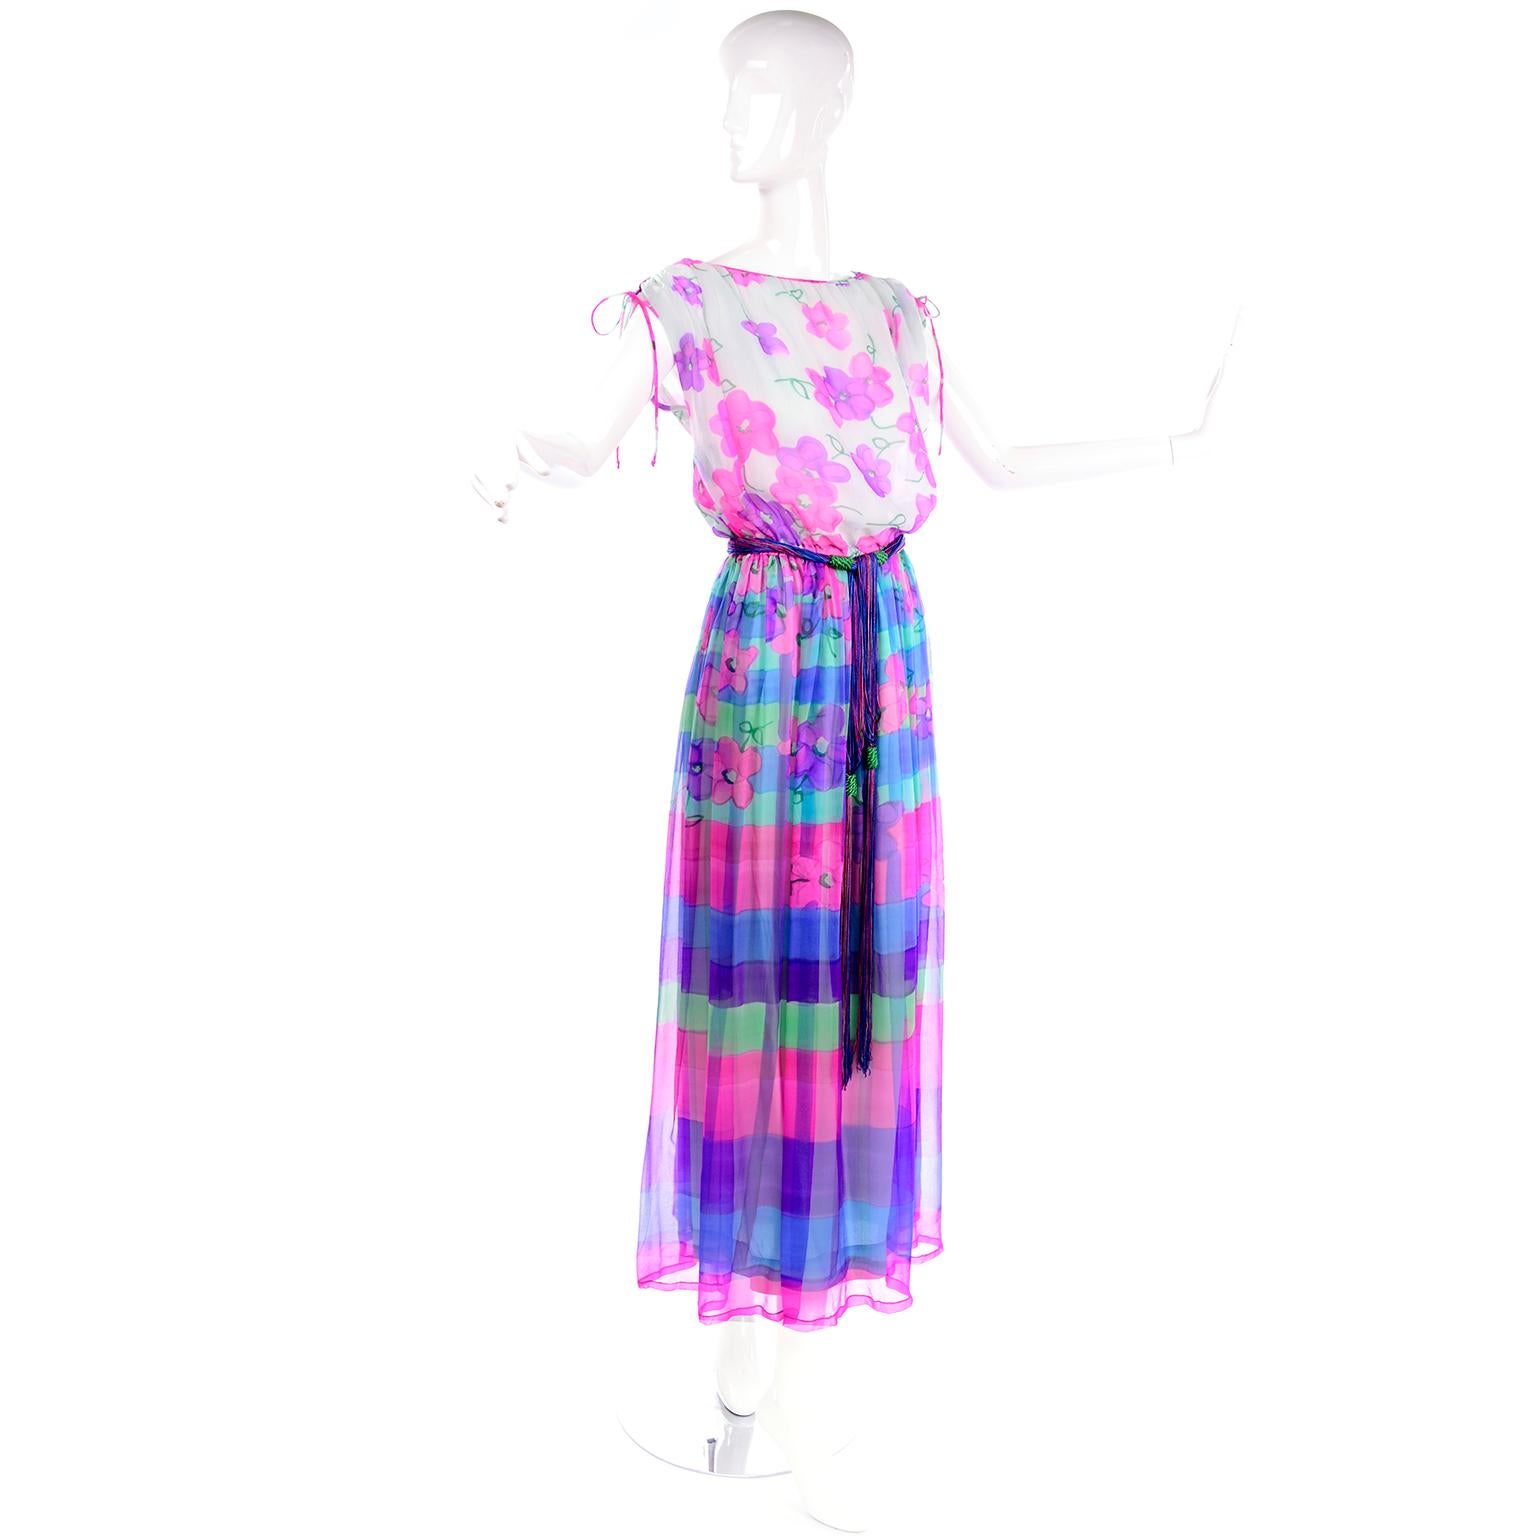 This is a fabulous vintage 1970's Christian Rupert maxi Dress with a floral chiffon bodice and a striped & floral patterned skirt.  The dress has a wonderful multi colored knotted string belt and ties at the shoulders.  The skirt itself has a lining